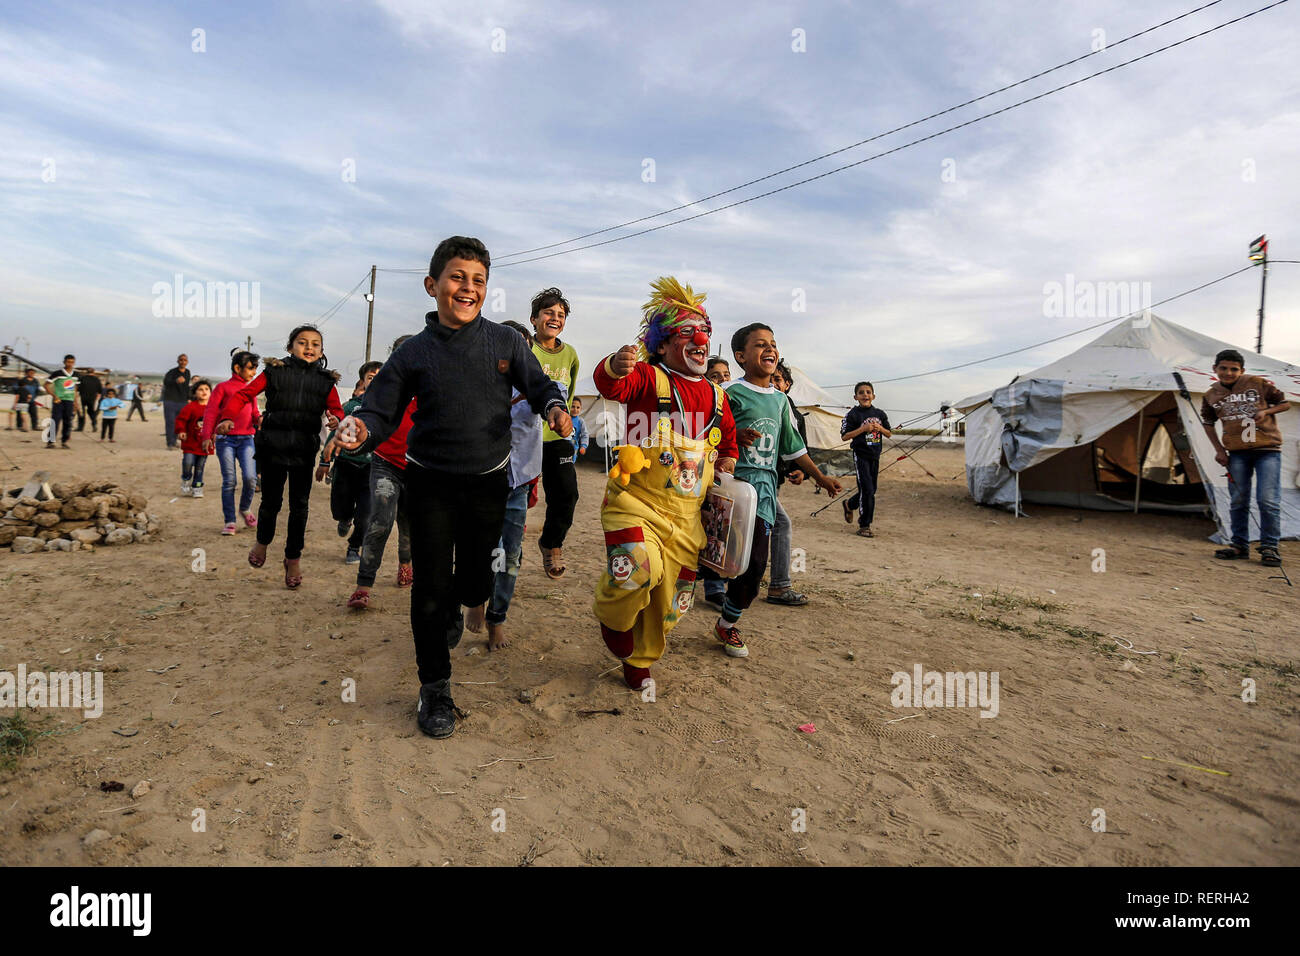 Gaza, Palestine. Autonomous Areas. 02nd Apr, 2018. The Palestinian clown Alaa Mekdad (34) plays with refugee children in the tent city built on the occasion of the protest action 'March of Return' at the border to Israel in the Gaza Strip. The photograph by dpa photographer Mohammed Talatene won 1st place in the Story category in the dpa Picture of the Year 2018 competition. Credit: Mohammed Talatene/dpa/Alamy Live News Stock Photo